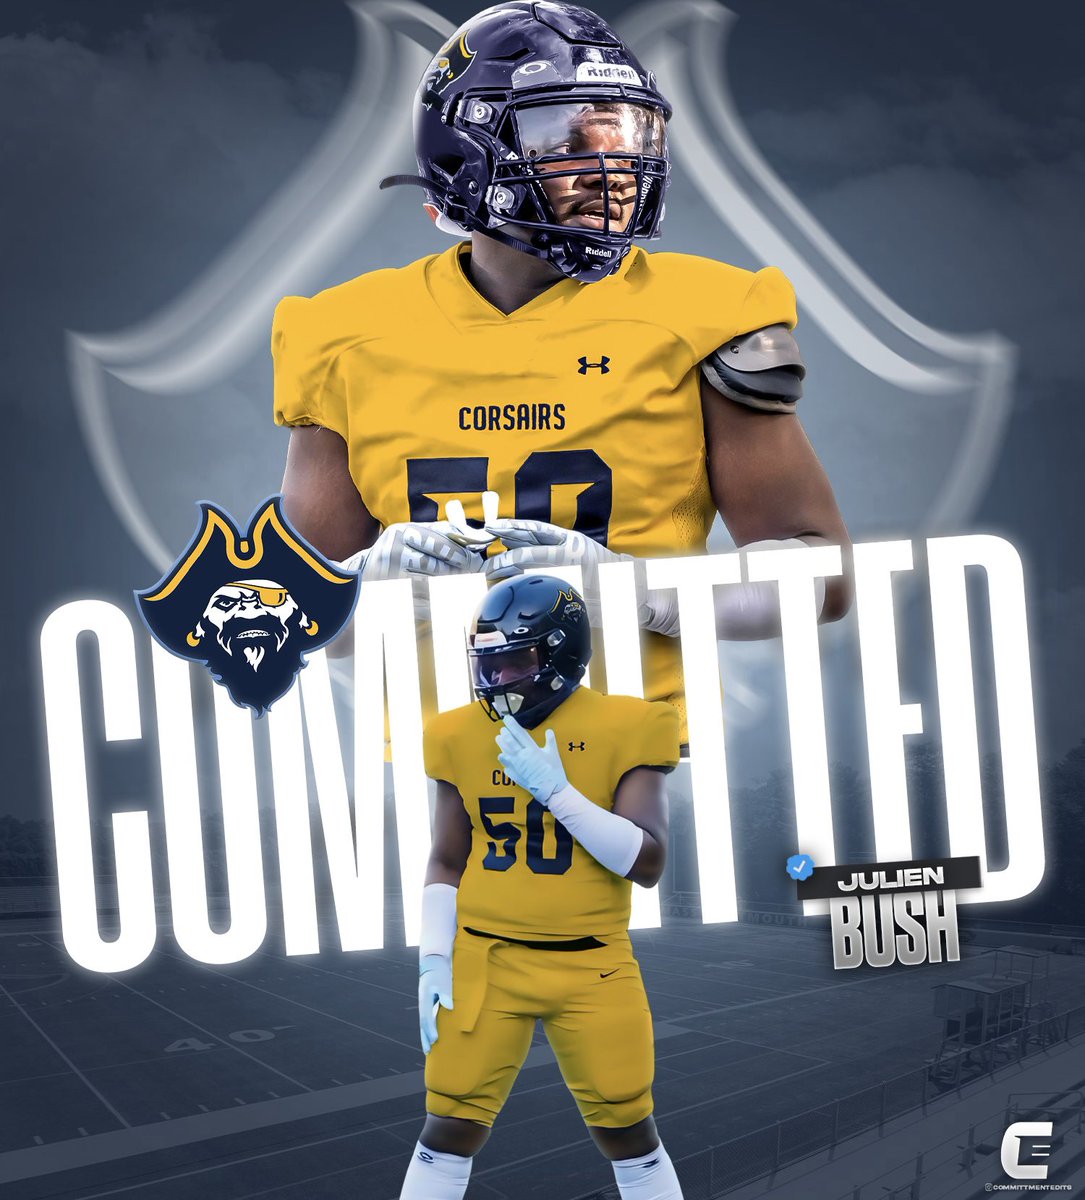 1000% Commited! GO CORSAIRS 🏴‍☠️🏈 Beyond blessed for the opportunity and can’t wait to get at it‼️ @UMASSDCoachSly @CorsairFootball @UMDCoachGacioch @LuHiFootball